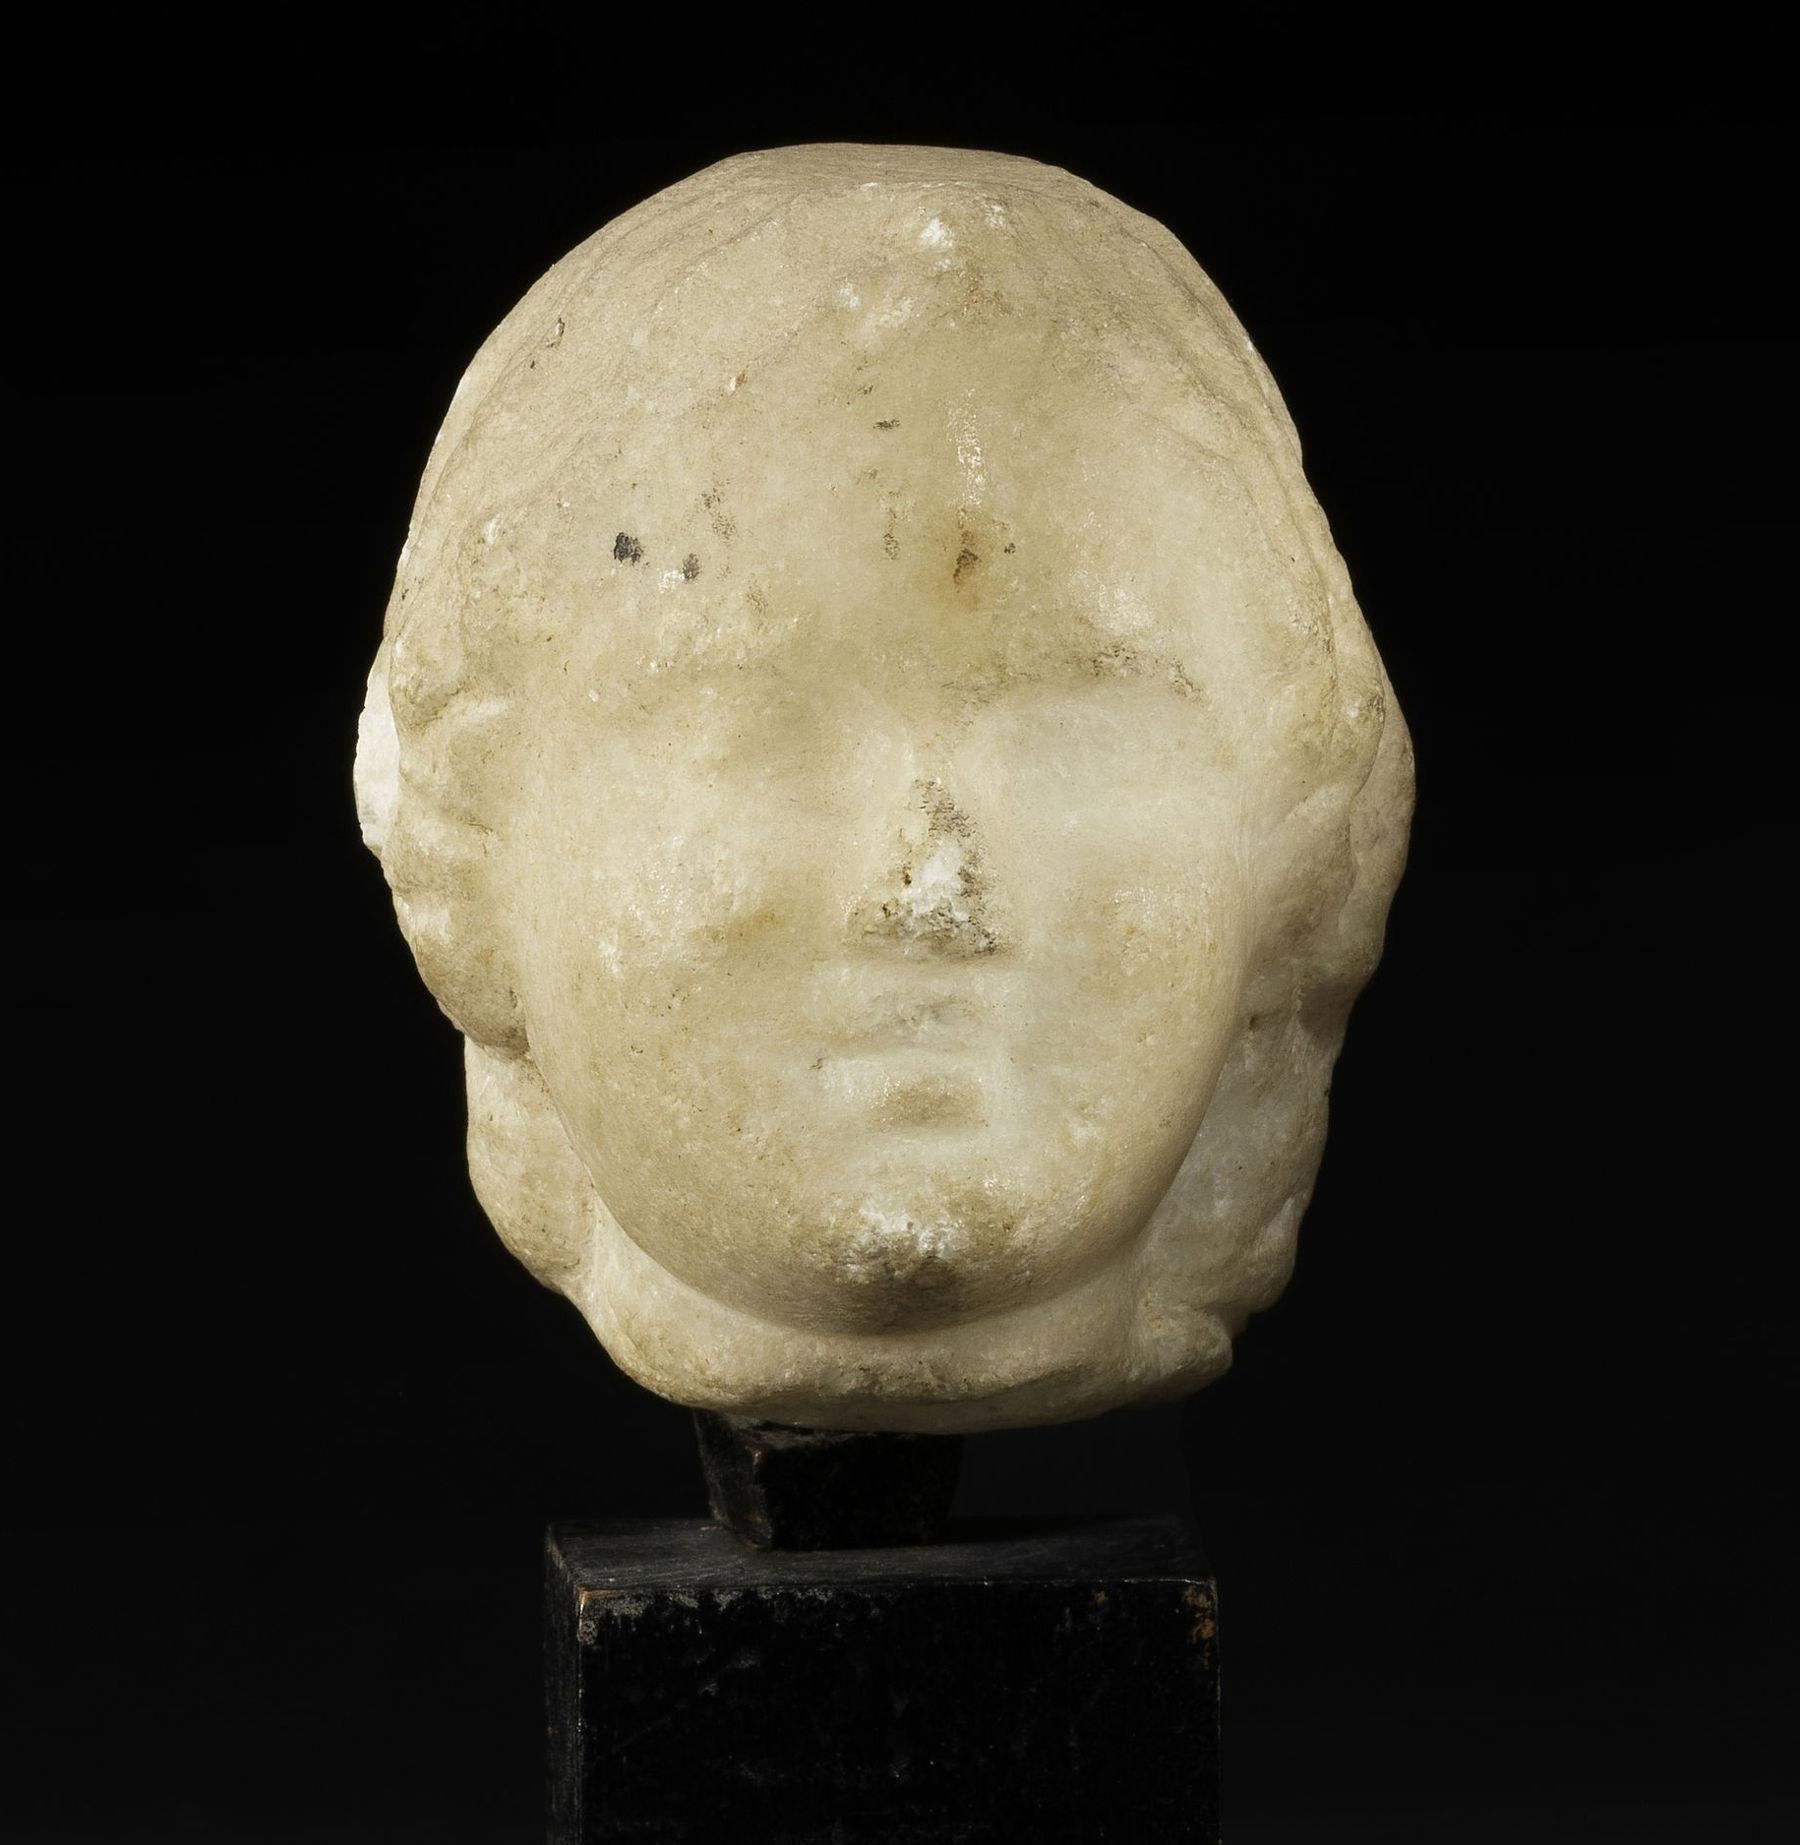 ITEM: Head
MATERIAL: Marble
CULTURE: Greek, Hellenistic period
PERIOD: 3rd – 1st Century B.C
DIMENSIONS: 55 mm x 47 mm x 47 mm
CONDITION: Good condition. Includes stand
PROVENANCE: Ex Swiss private collection, acquired since at least 1982

Comes